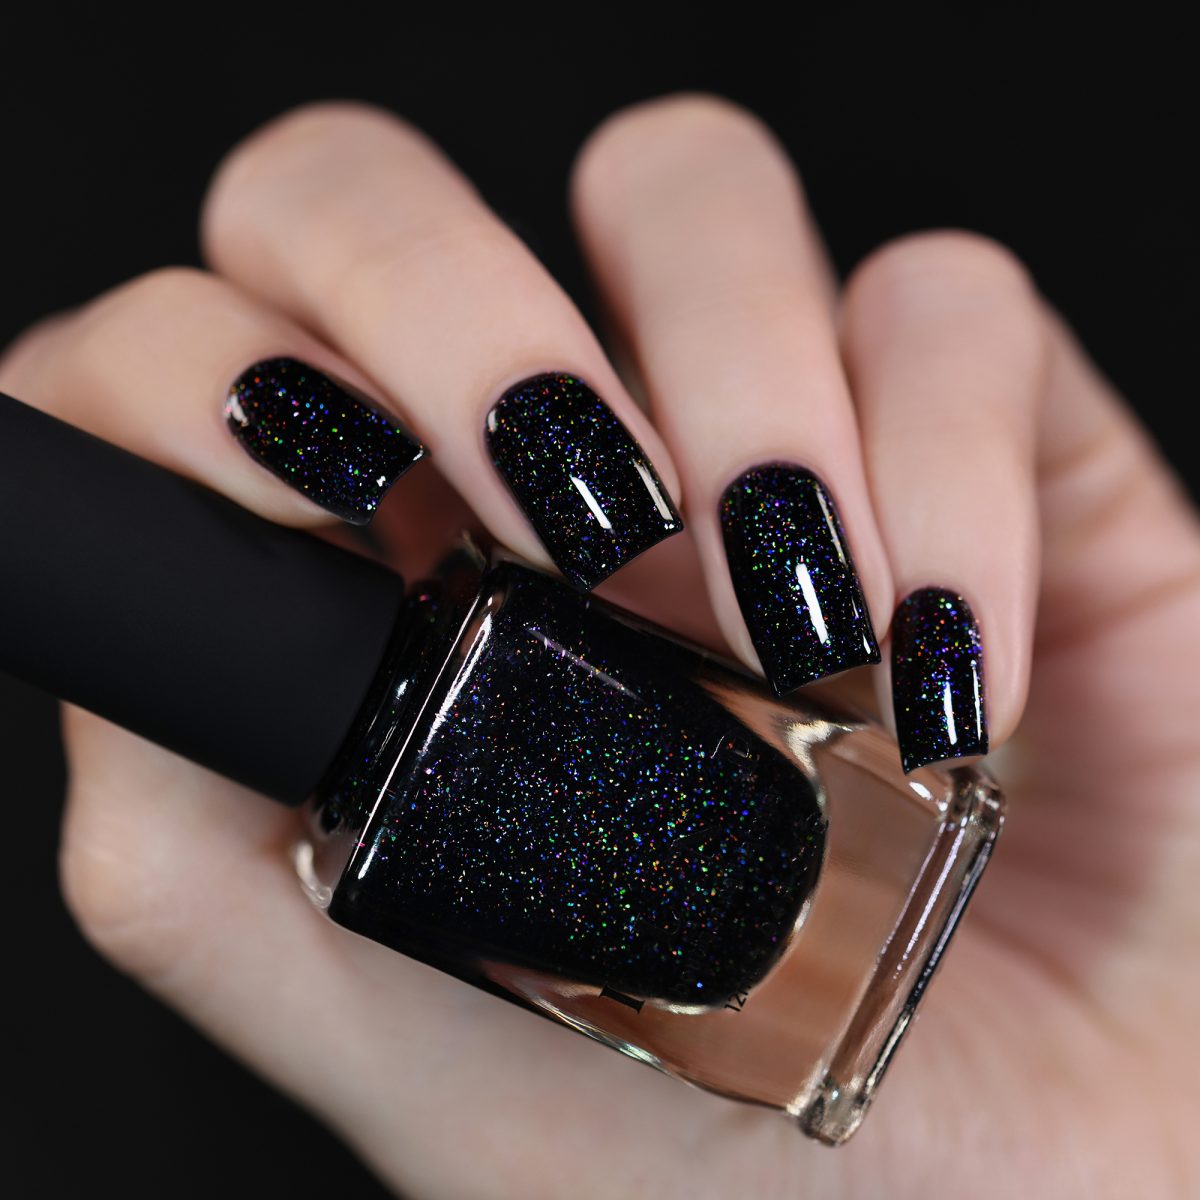 Party Bus - Black Rainbow Flake Holographic Shimmer Nail Polish by ILNP